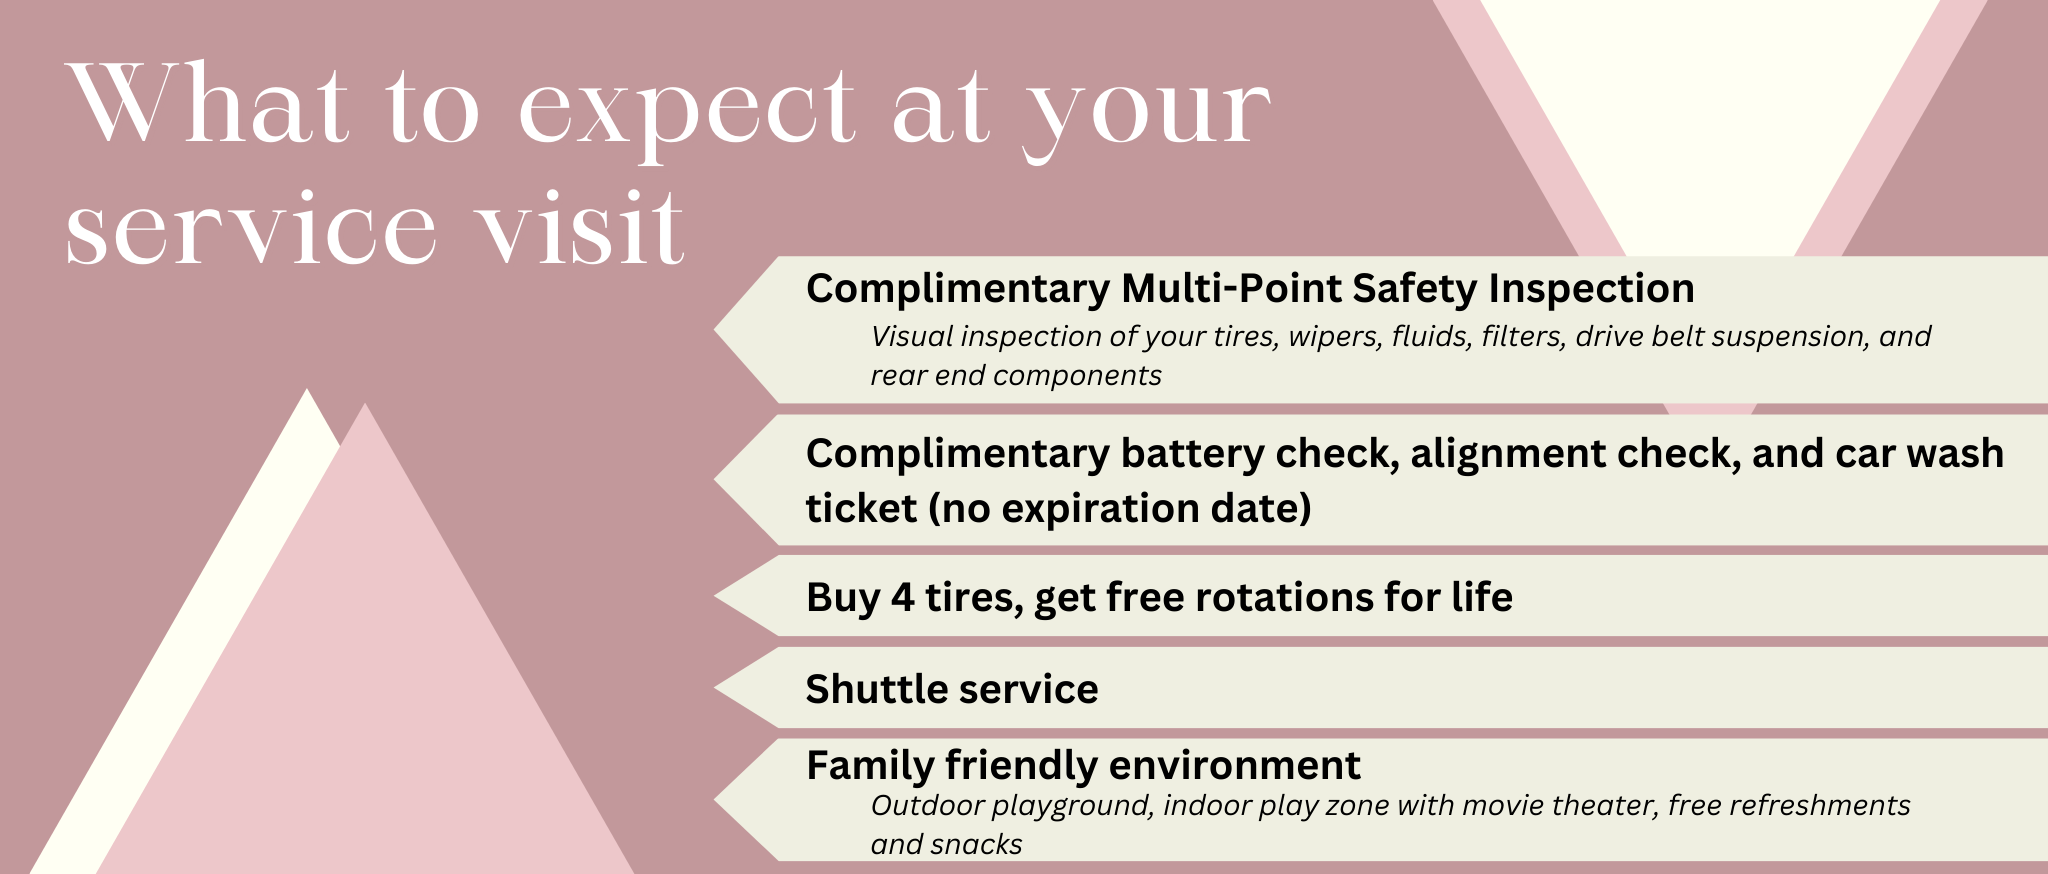 What to expect at your service visit slide